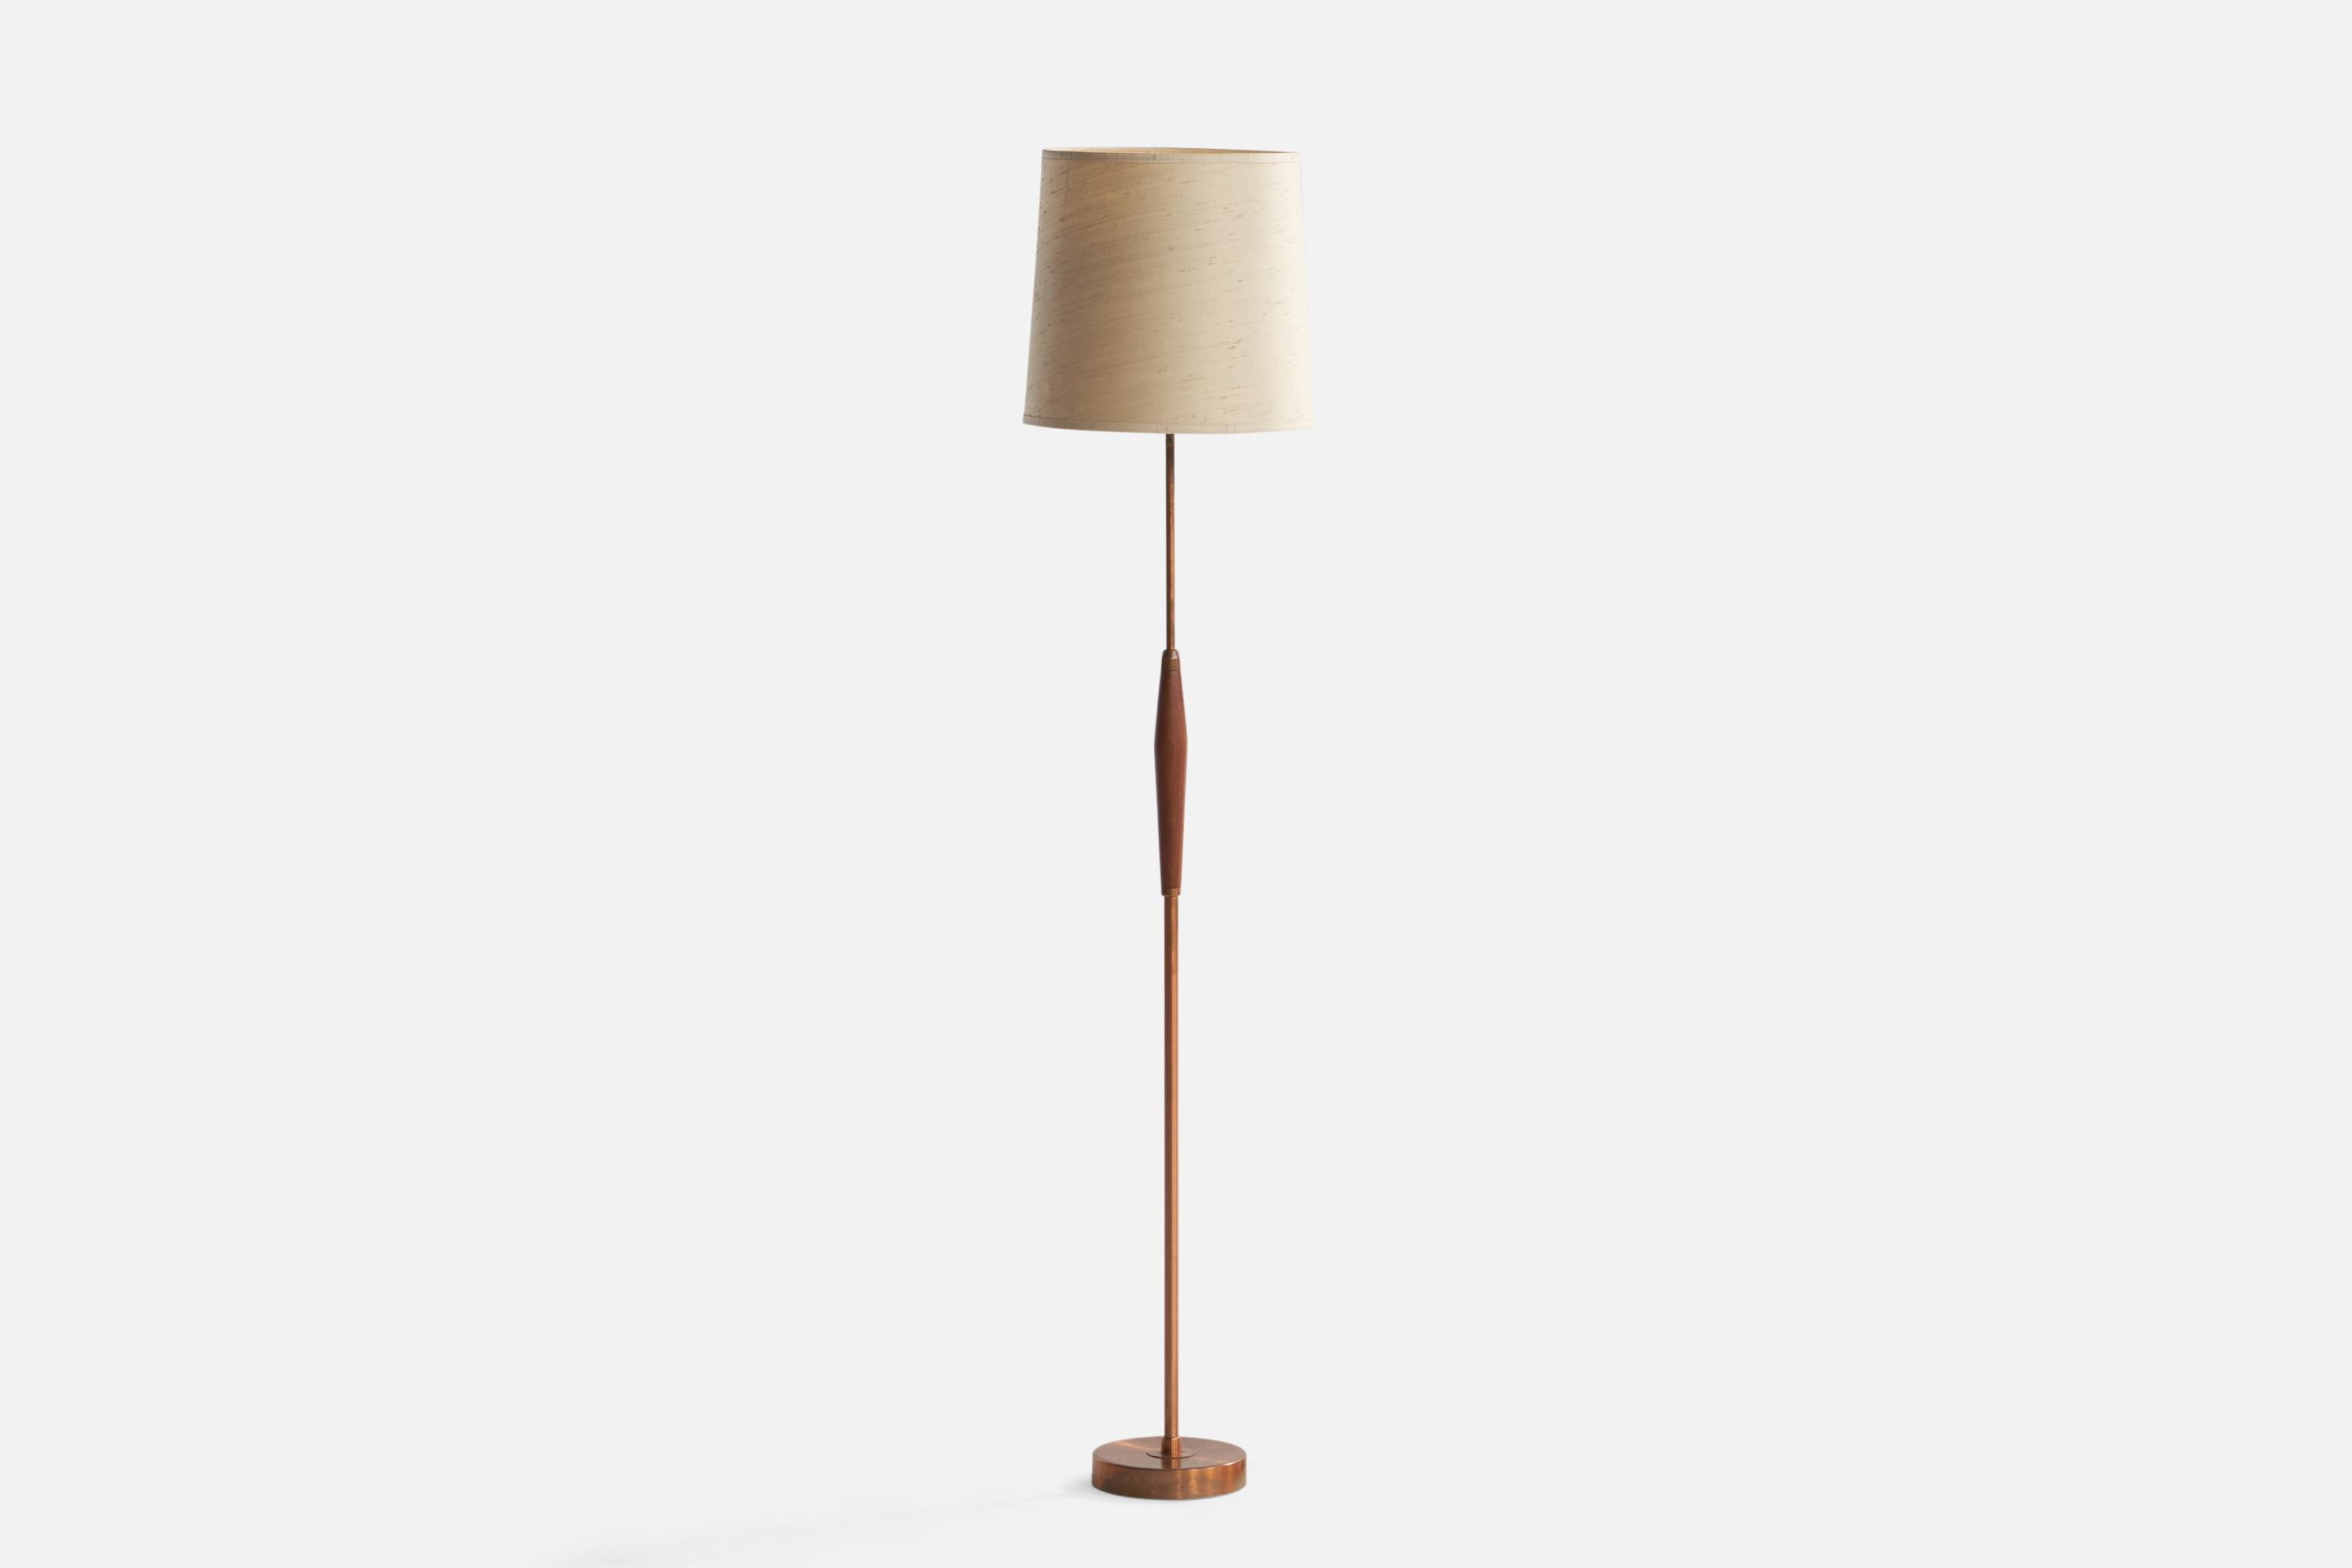 A copper, teak and beige fabric floor lamp designed and produced in Sweden, 1950s.

Overall Dimensions (inches): 55” H x 12” Diameter. Stated dimensions include shade.
Bulb Specifications: E-26 Bulb
Number of Sockets: 1
All lighting will be